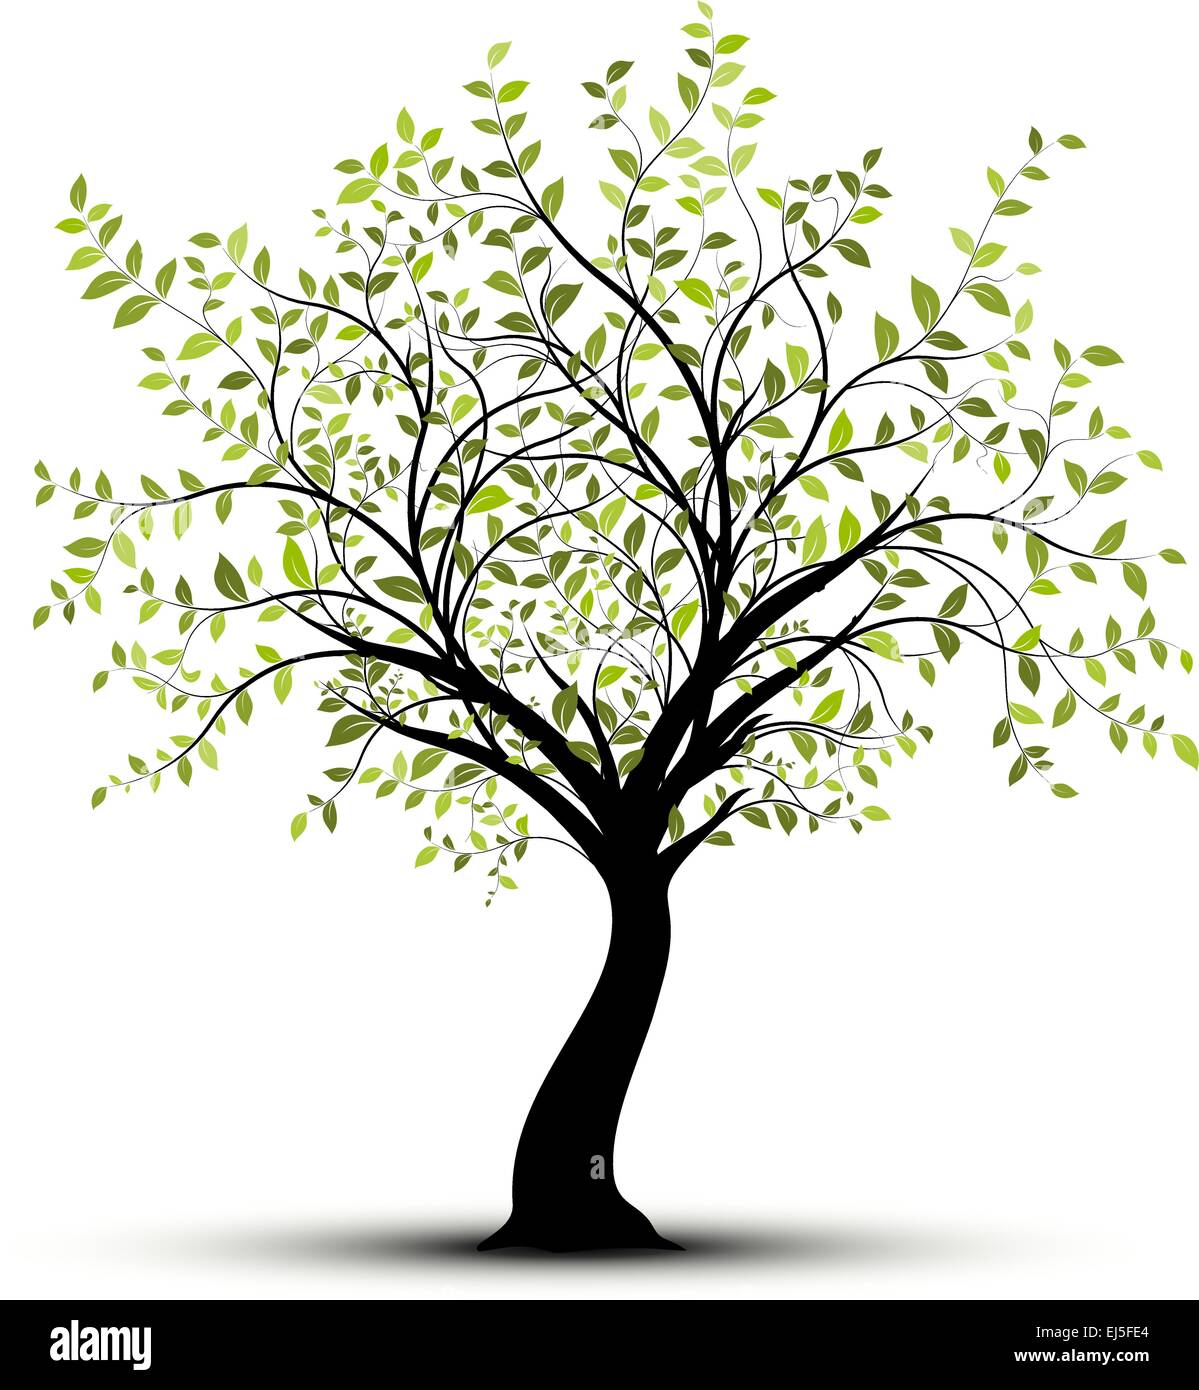 Young vector tree with green foliage over white background with shadow Stock Vector